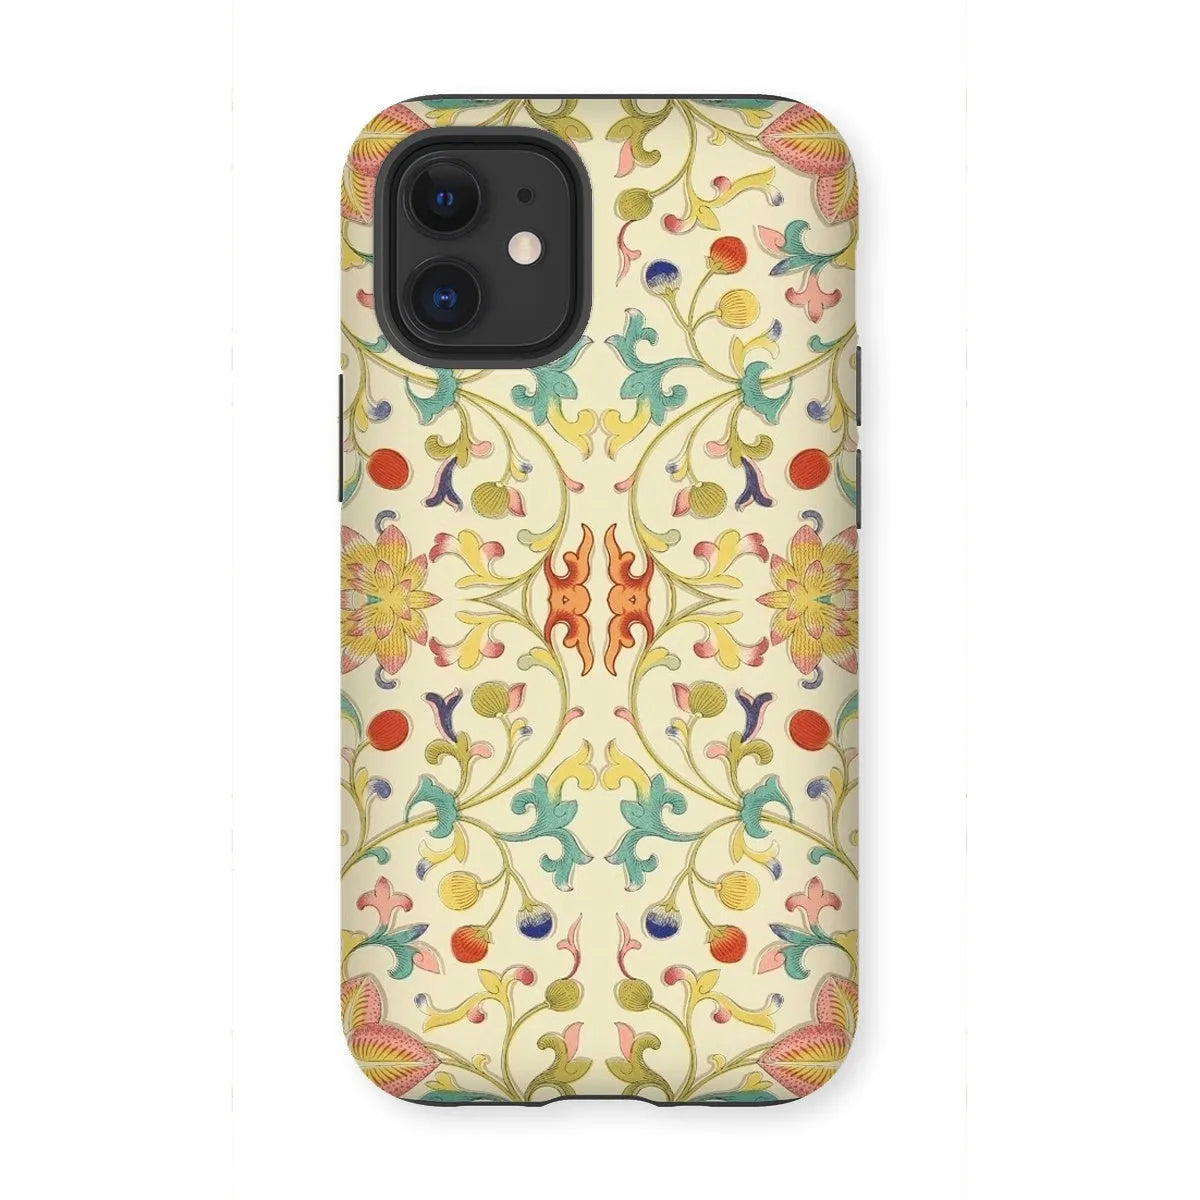 Over The Rainbow - Chinoiserie Pattern Art Phone Case - Iphone 12 Mini / Matte - Mobile Phone Cases - Aesthetic Art